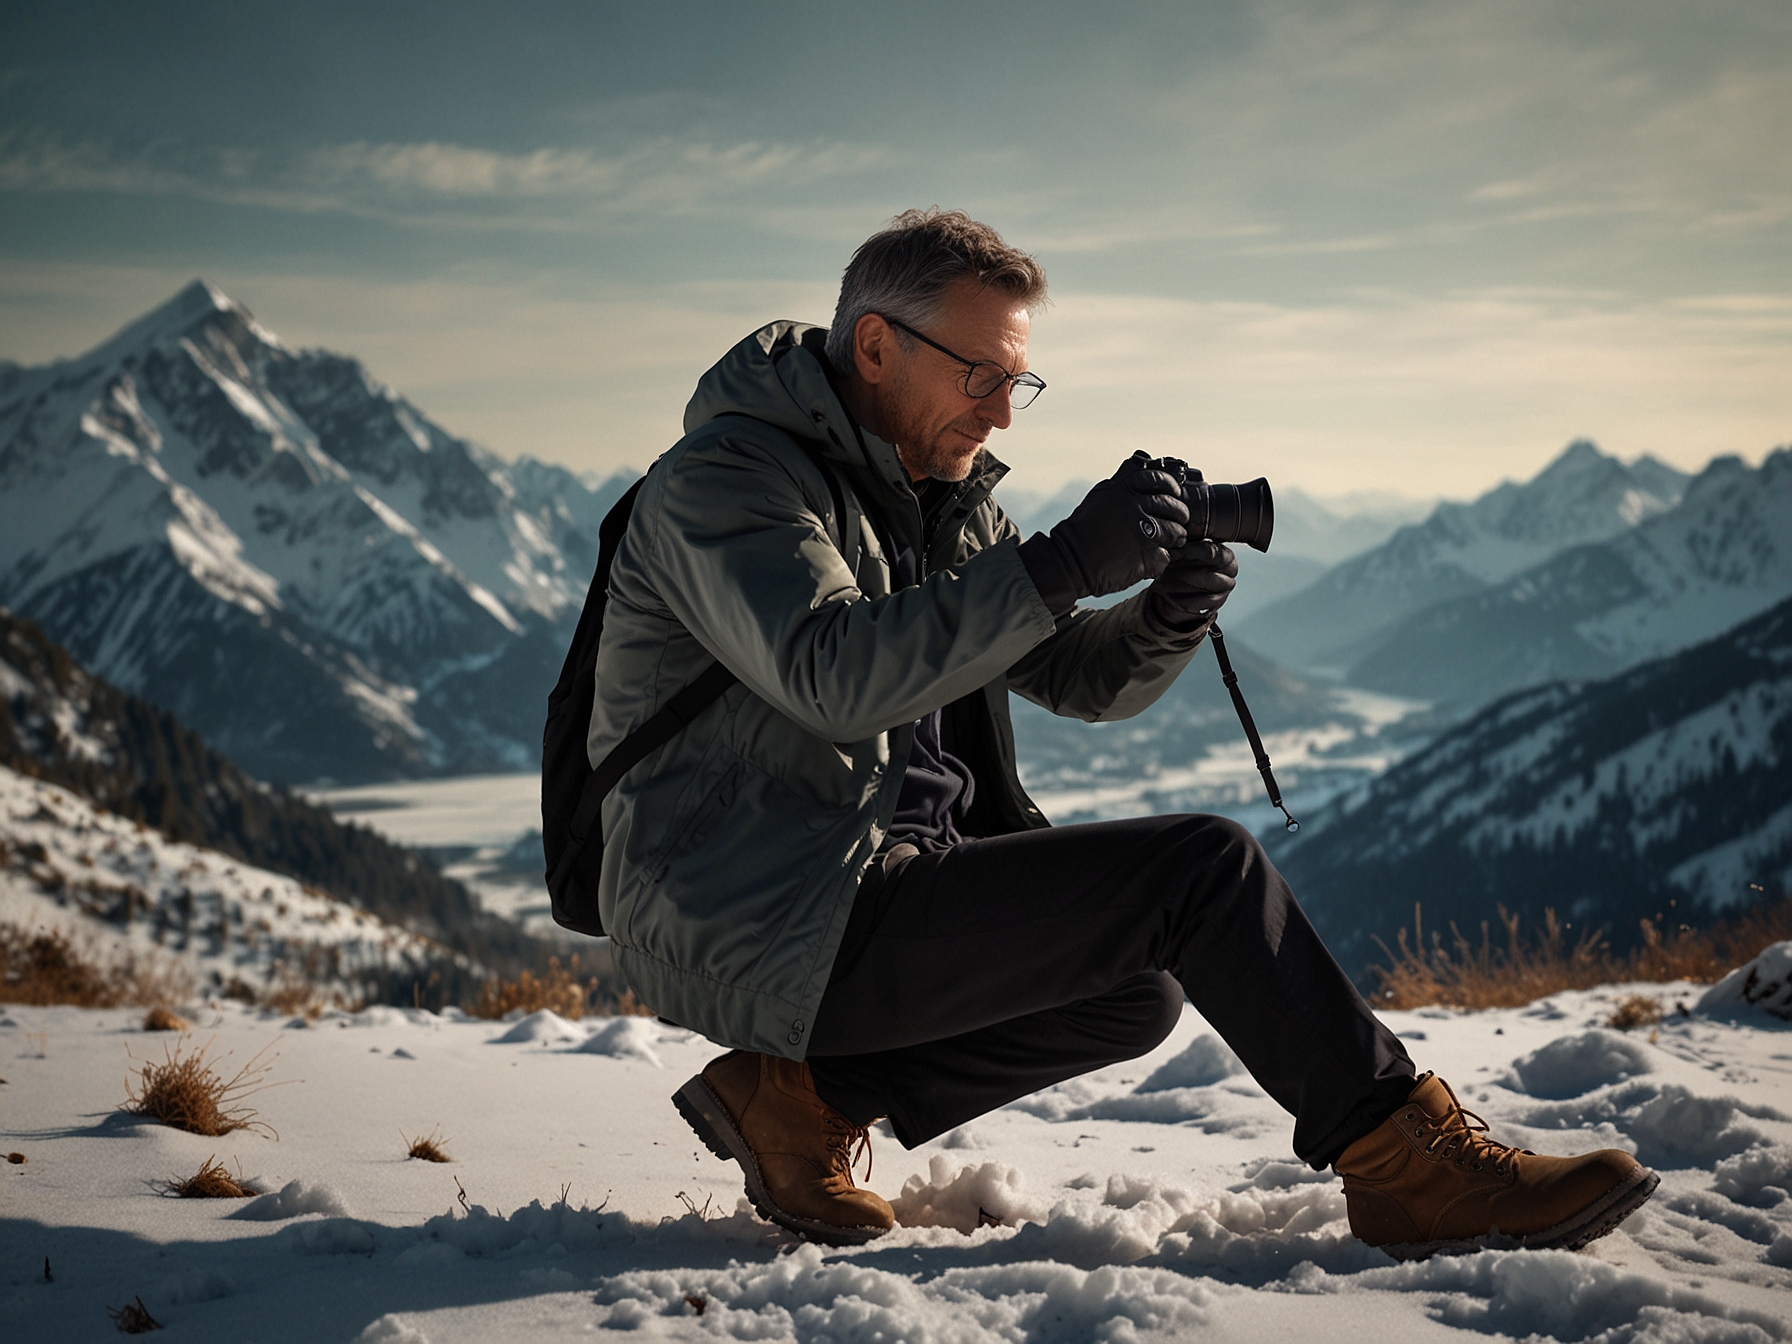 A photographer using the Nikon Z6 III in various shooting conditions, highlighting its advanced performance, fast autofocus, and capability to capture high-quality images in challenging environments.